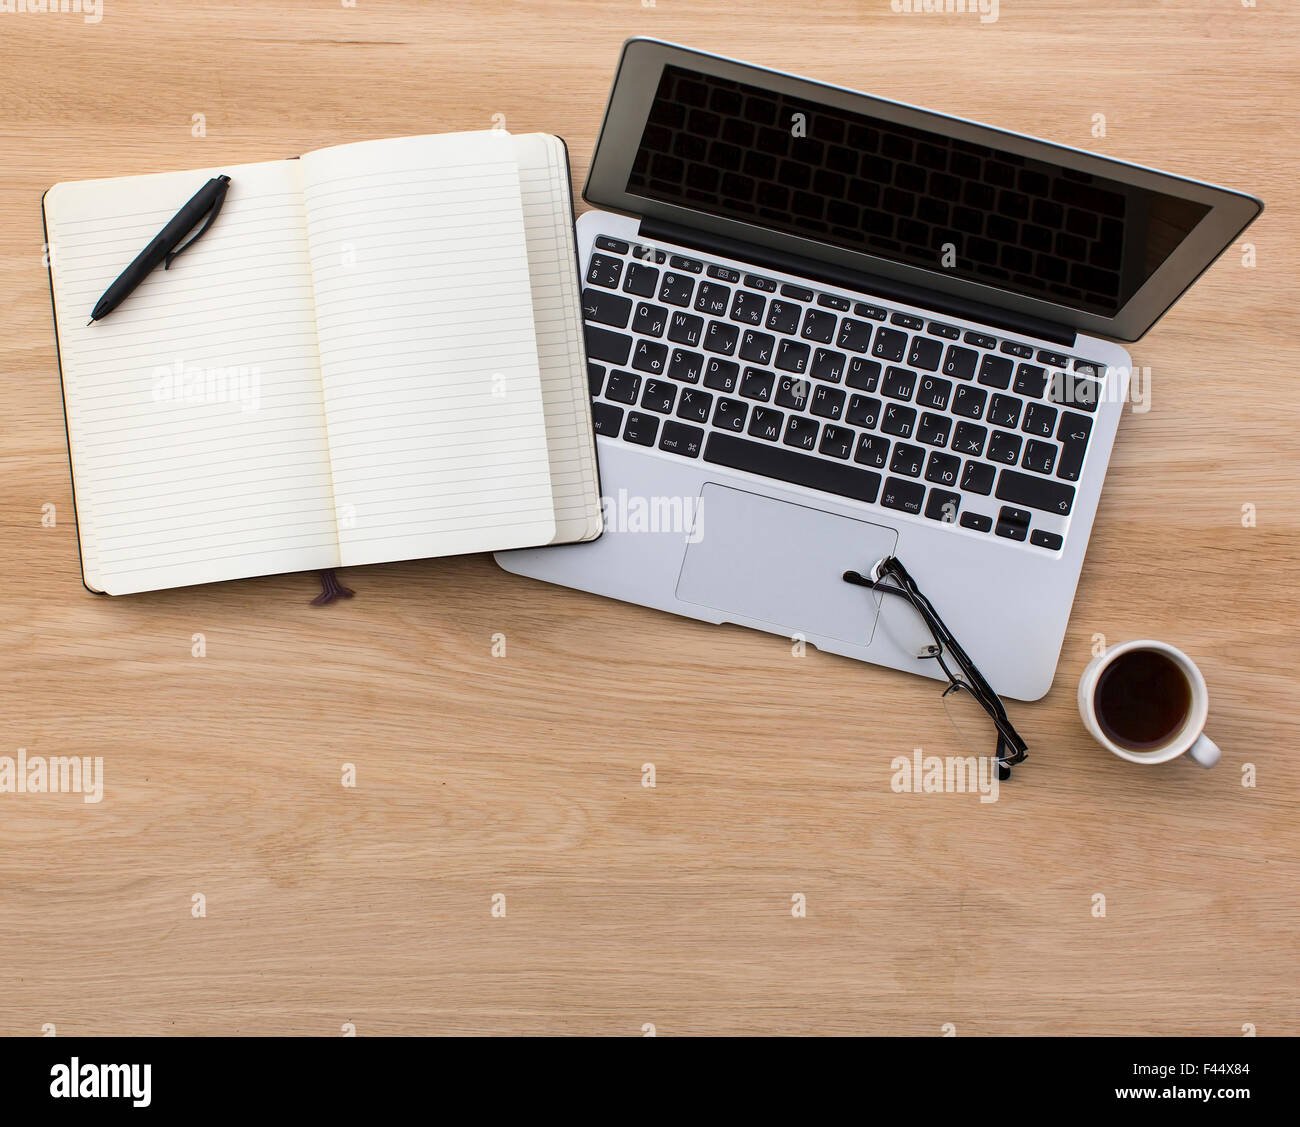 Laptop and opened Notepad on wooden table top view. Stock Photo